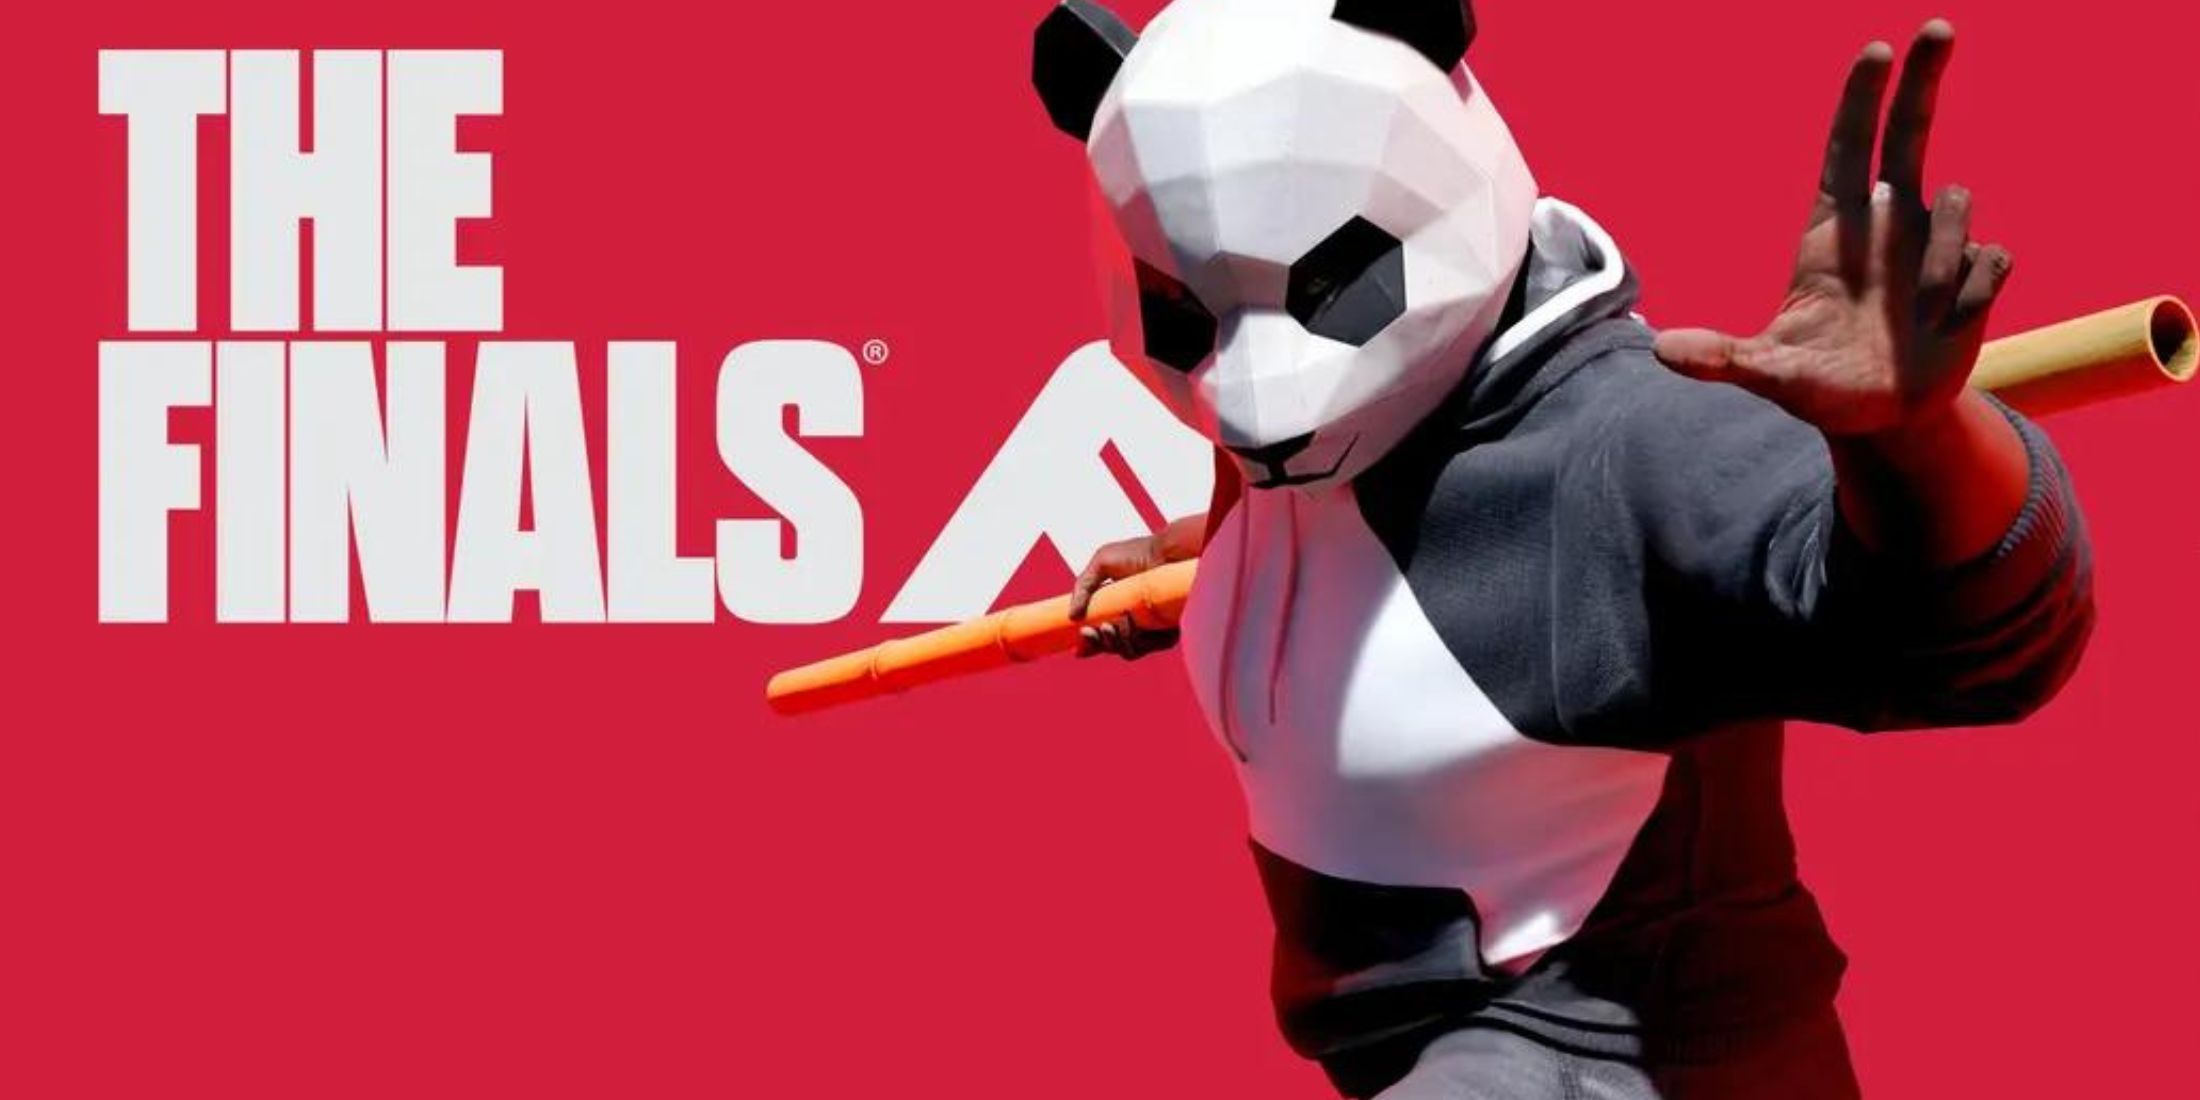 Key art for The Finals showing a person in a panda mask.